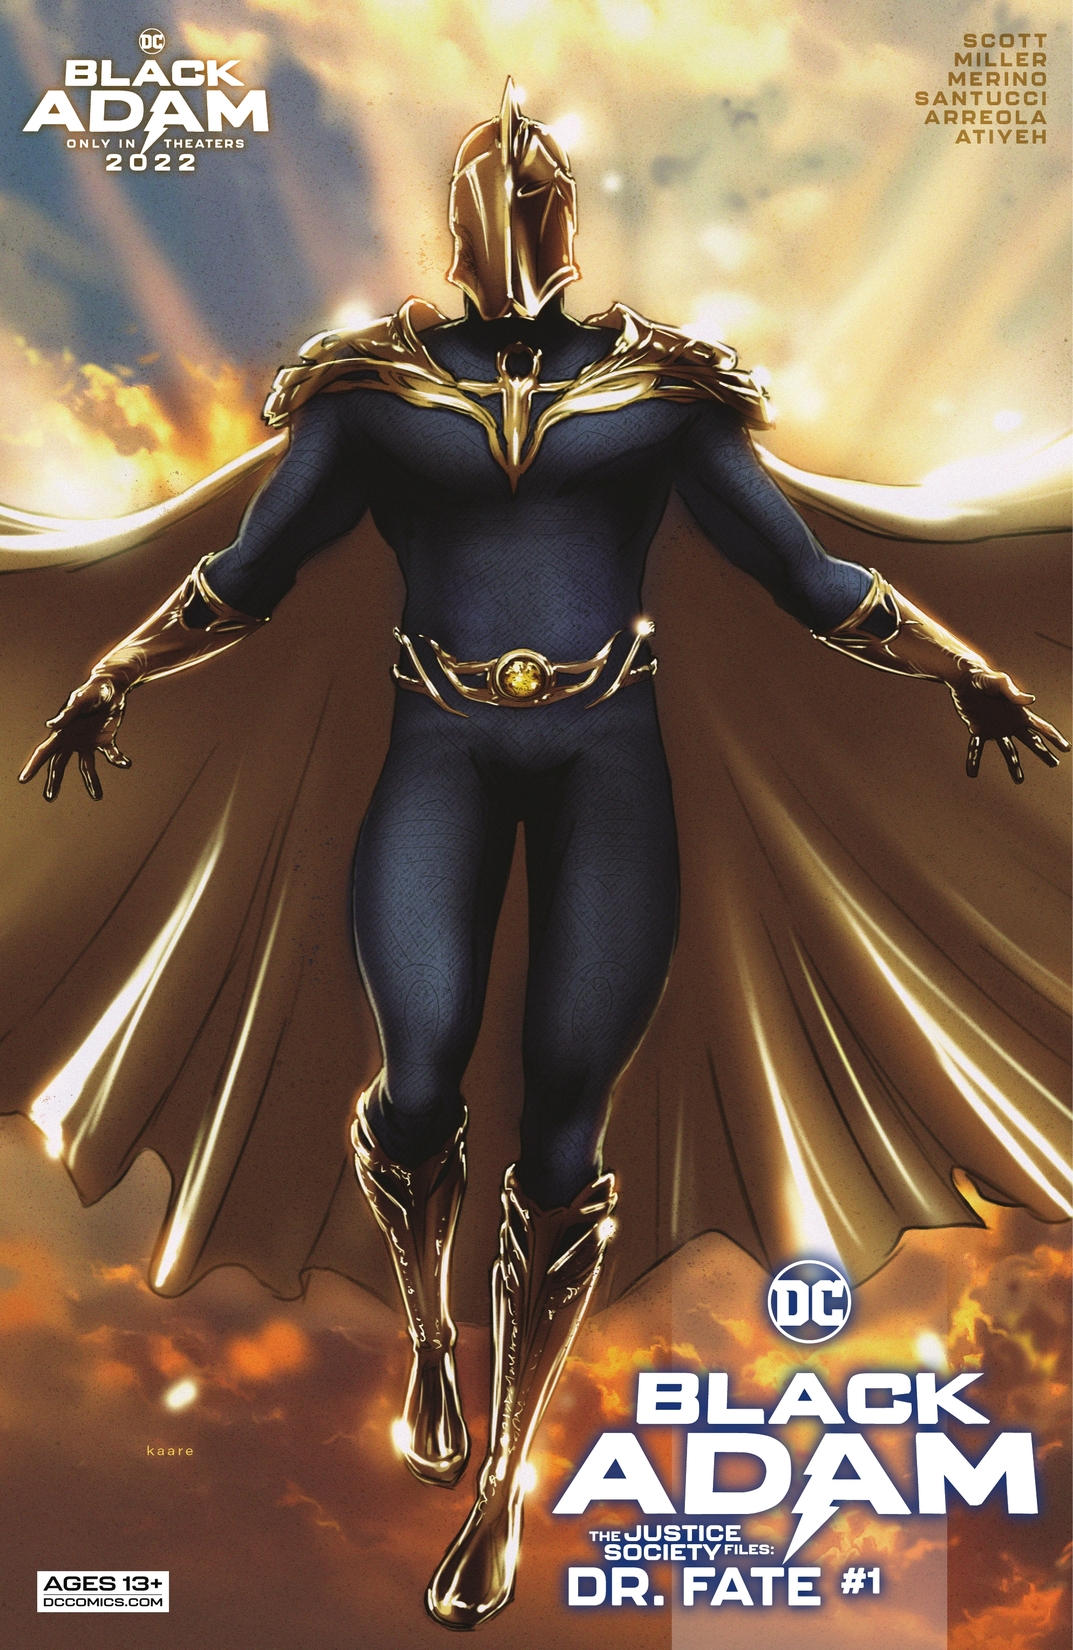 Black Adam - The Justice Society Files: Dr. Fate #1 preview images